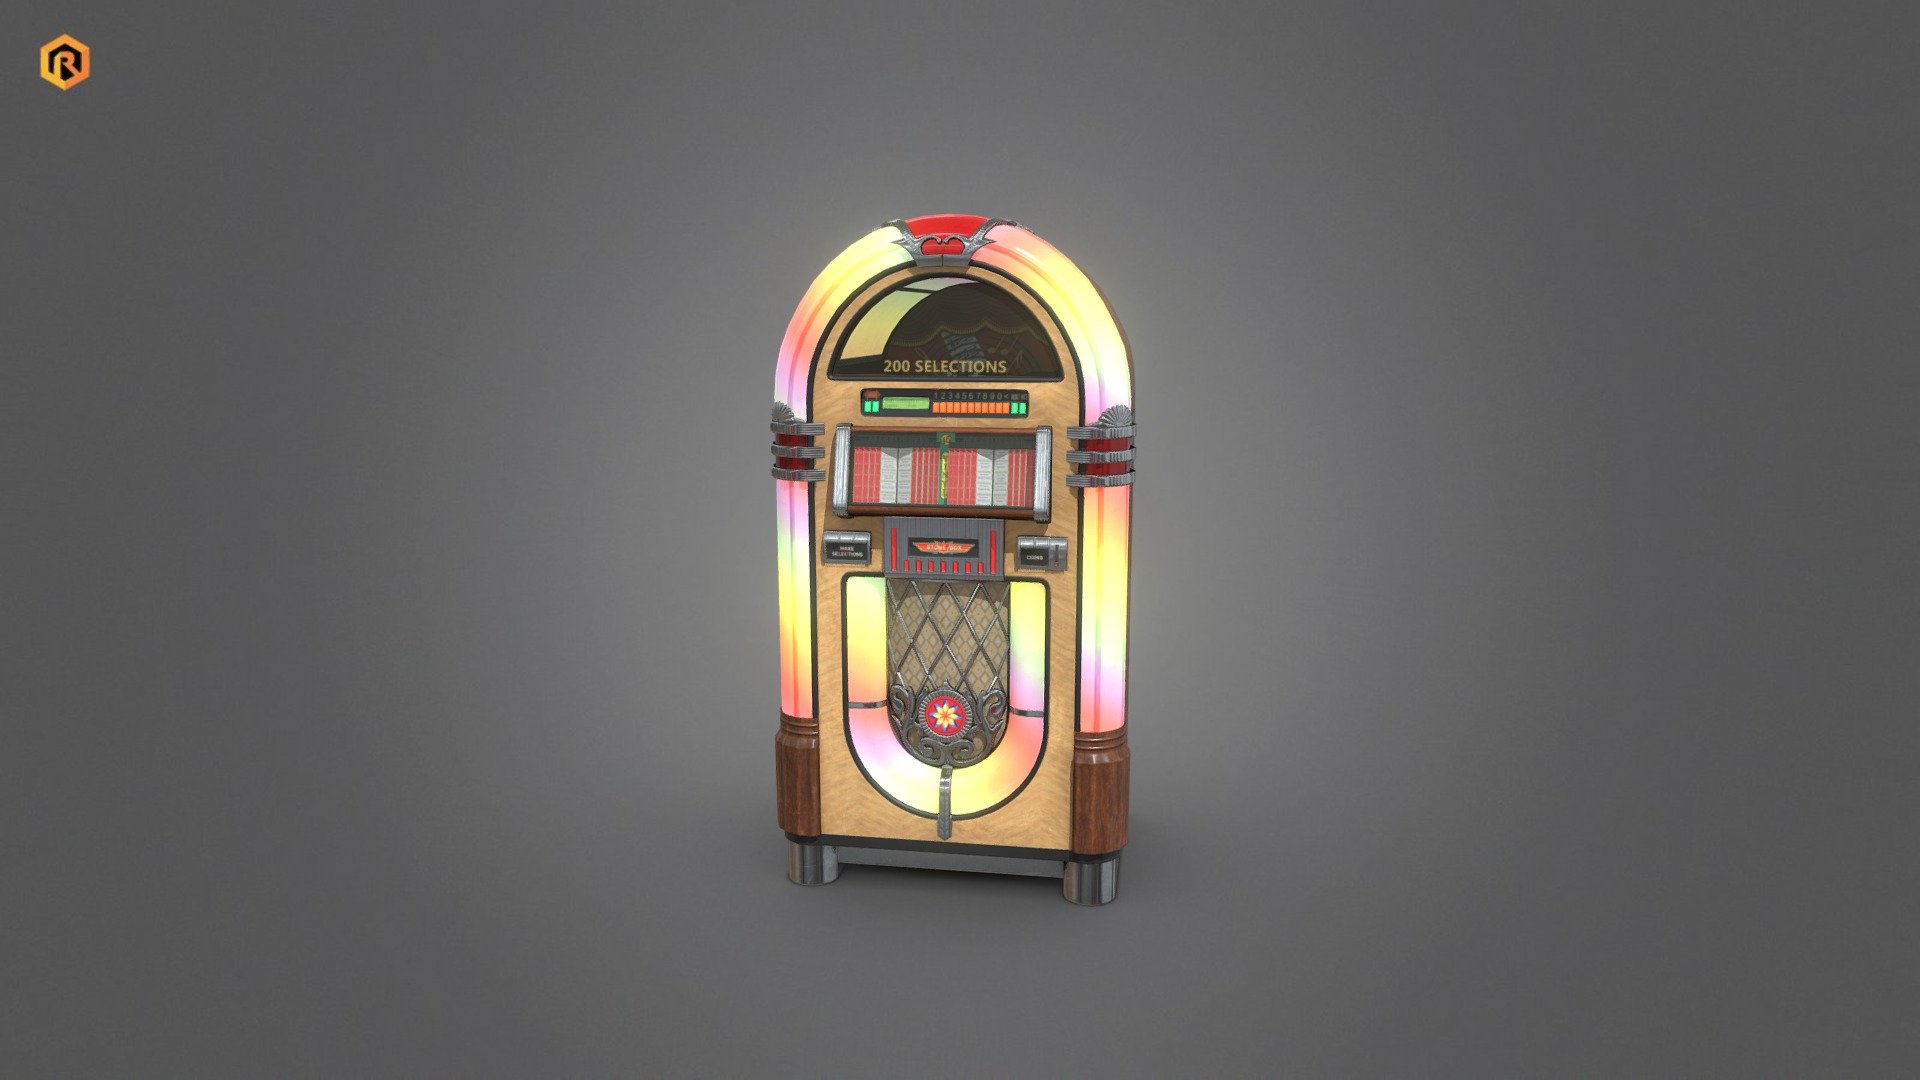 Low-poly PBR 3D model of music box called Jukebox.

This 3D model is best for use in games and other VR / AR, real-time applications such as Unity or Unreal Engine.  It can also be rendered in Blender (ex Cycles) or Vray as the model is equipped with all required PBR textures.  

This is a regular, free version but you can support me and download **PRO version ** (with sources) from here: https://skfb.ly/oG7TJ

Technical details:




4 PBR textures sets (Main body, emission, alpha, titles) 

12413 Triangles.

Model is one mesh.

Lot of additional file formats included (Blender, Unity, Maya etc.)  

More file formats are available in additional zip file on product page.

Please feel free to contact me if you have any questions or need any support for this asset.

Support e-mail: support@rescue3d.com - Jukebox - Download Free 3D model by Rescue3D Assets (@rescue3d) 3d model